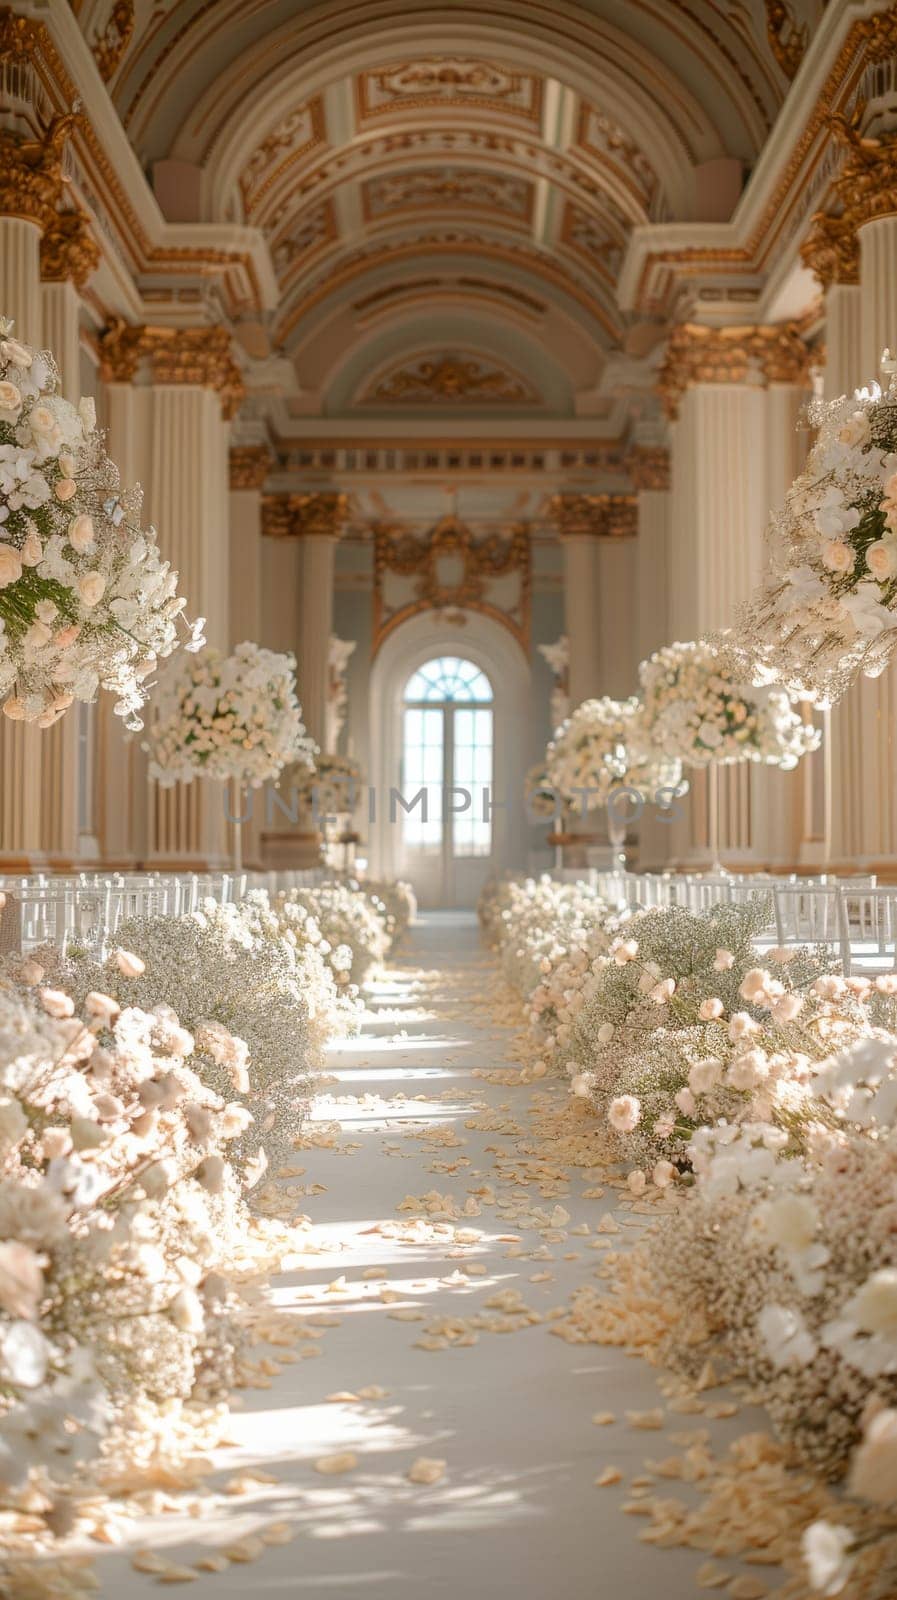 A long, narrow room with white flowers and white chairs. The flowers are arranged in a way that they are scattered throughout the room, creating a sense of movement and flow